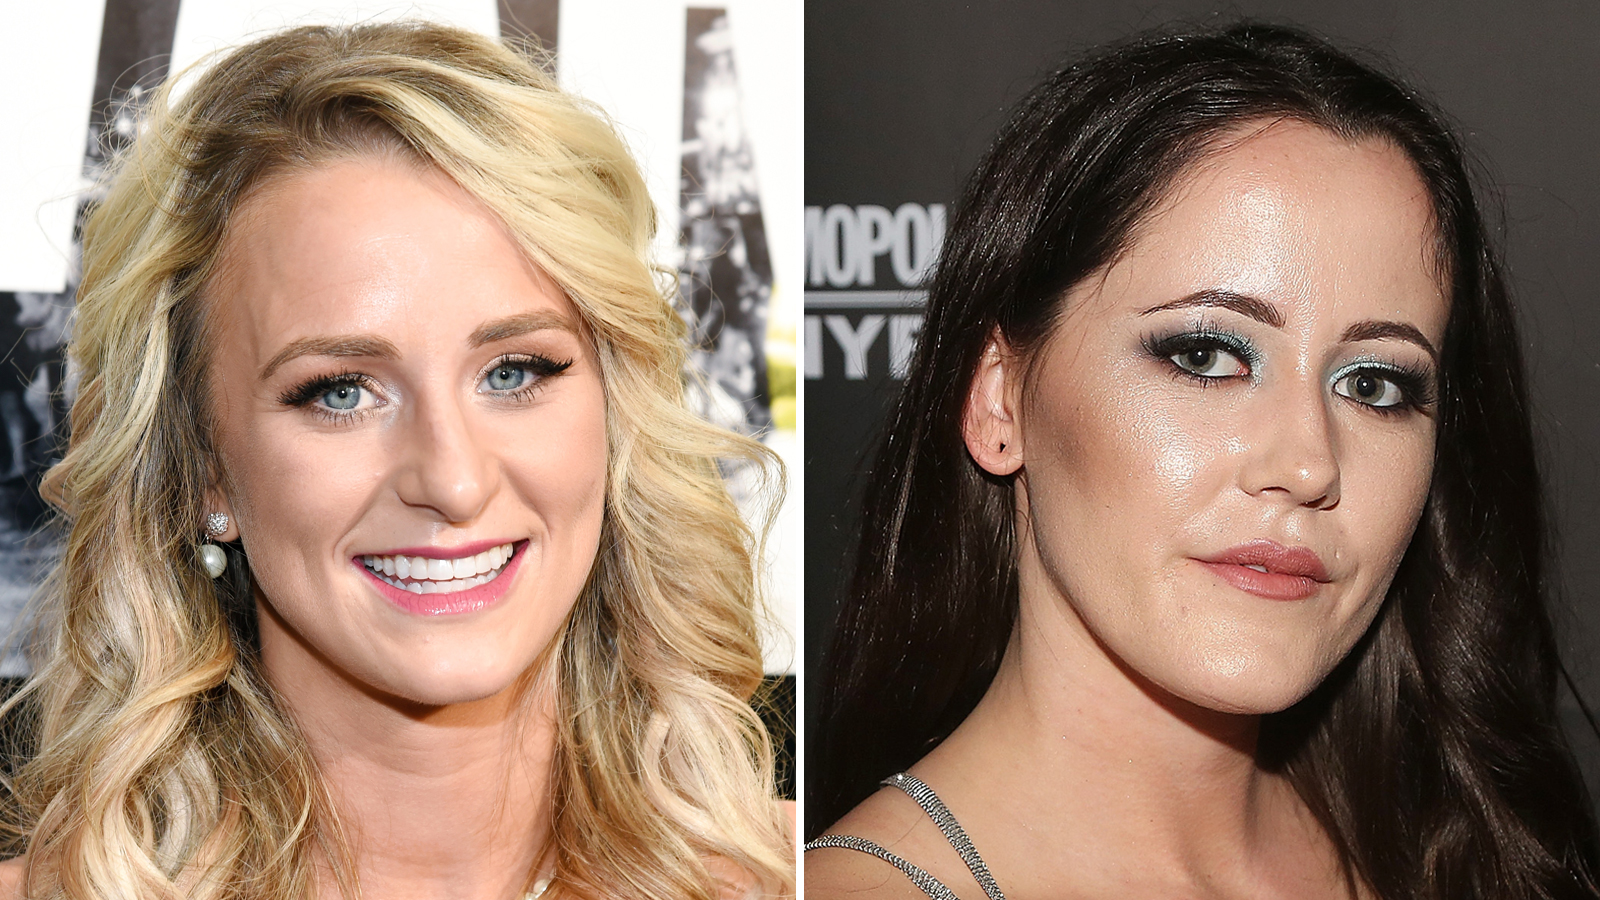 Teen Mom 2 Alum Jenelle Evans Shades Ex Costar Leah Messer In Touch Weekly